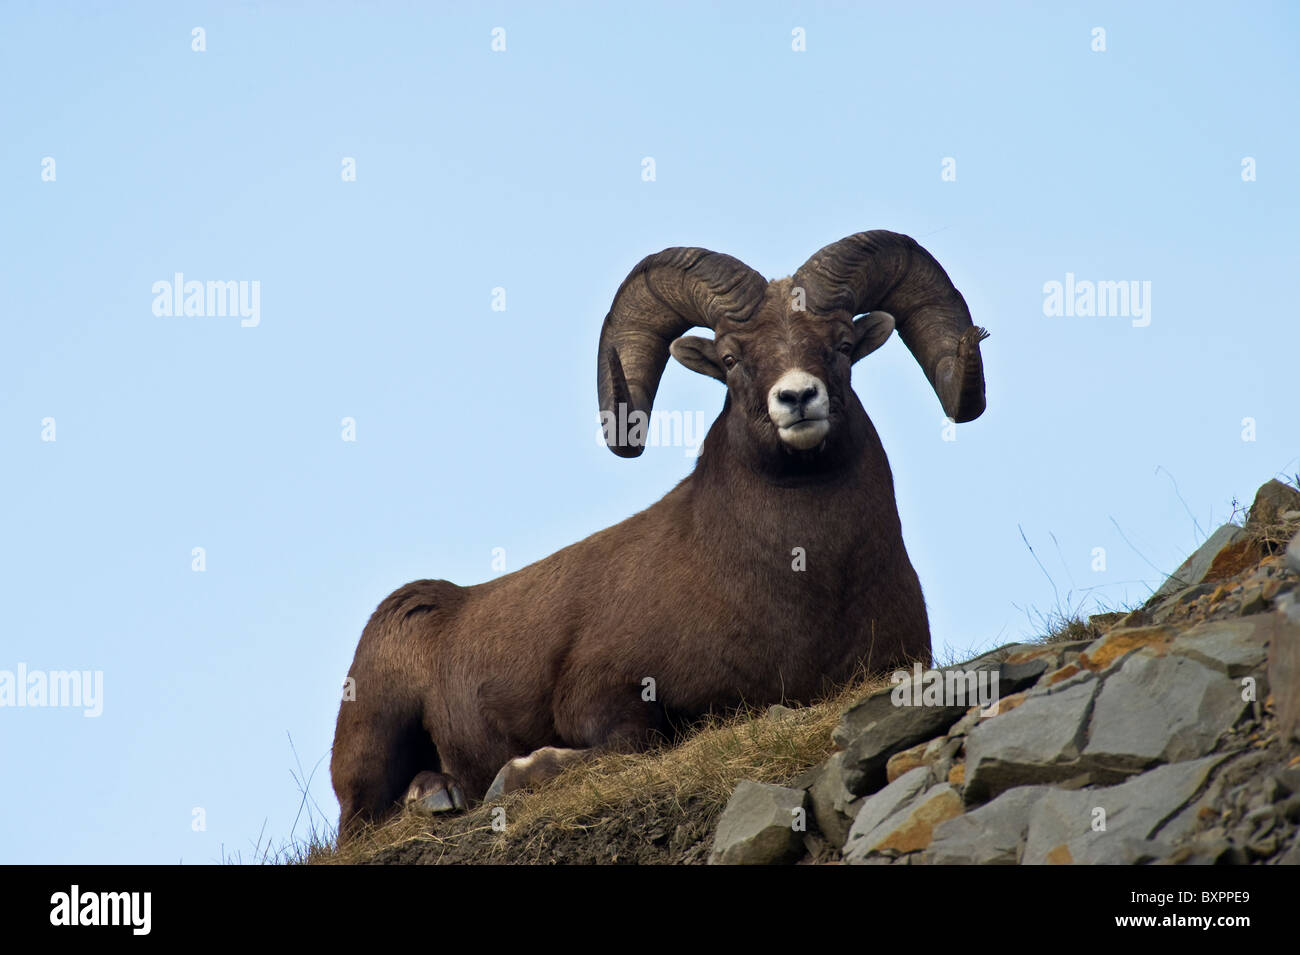 A horizontal image of a Bighorn Sheep laying down on a grassy spot on a rocky hillside. Stock Photo